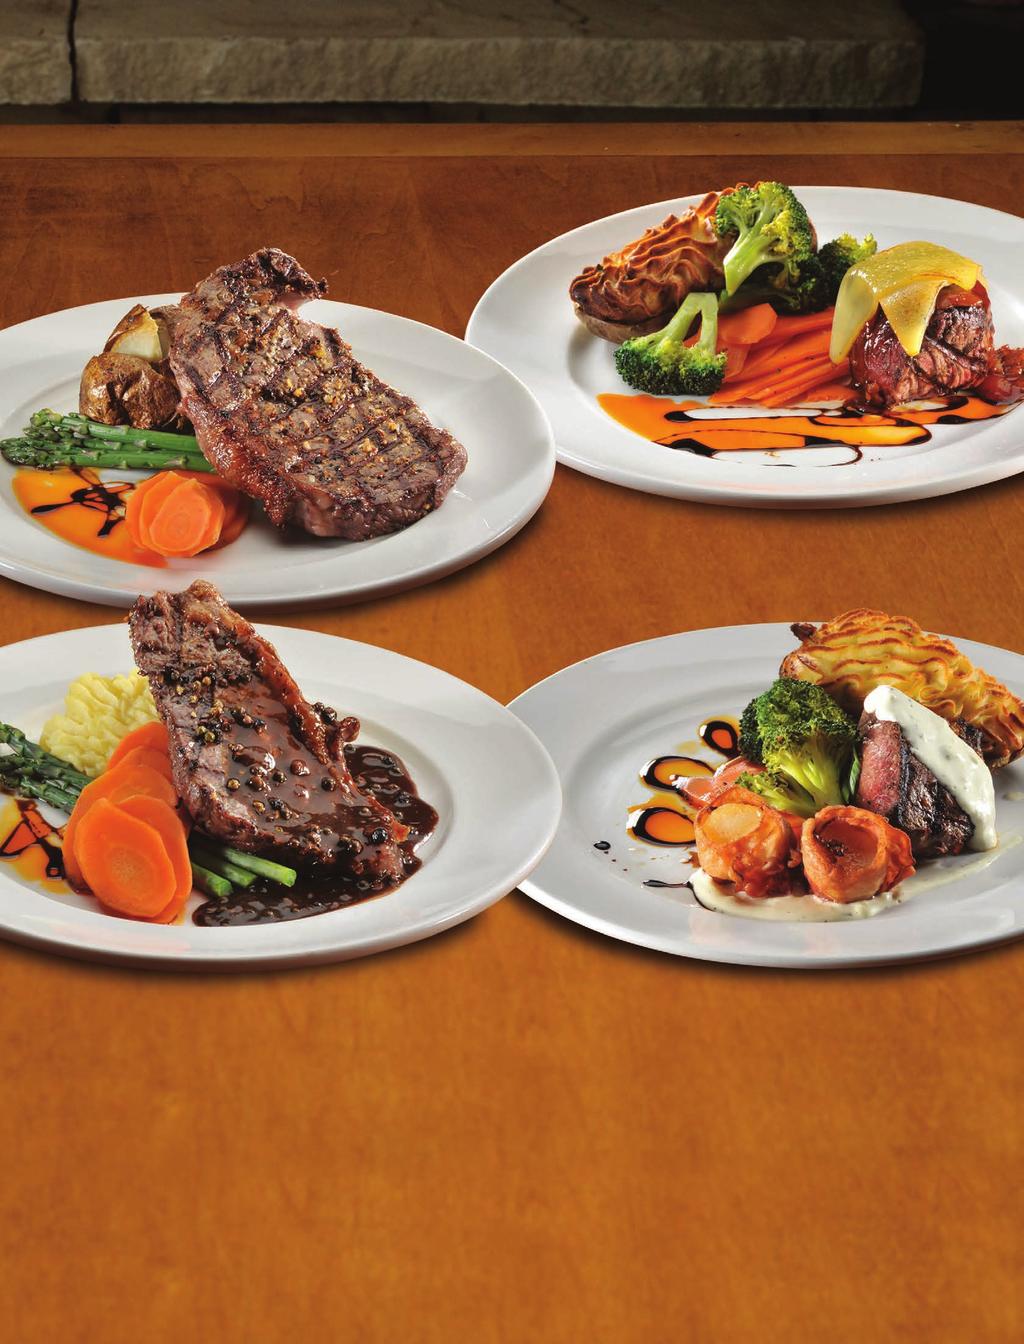 PRIME Ribeye A 12 oz AAA Canadian Ribeye steak grilled to perfection. $39.95 Longhorn Canyon Beef Simply the Best!